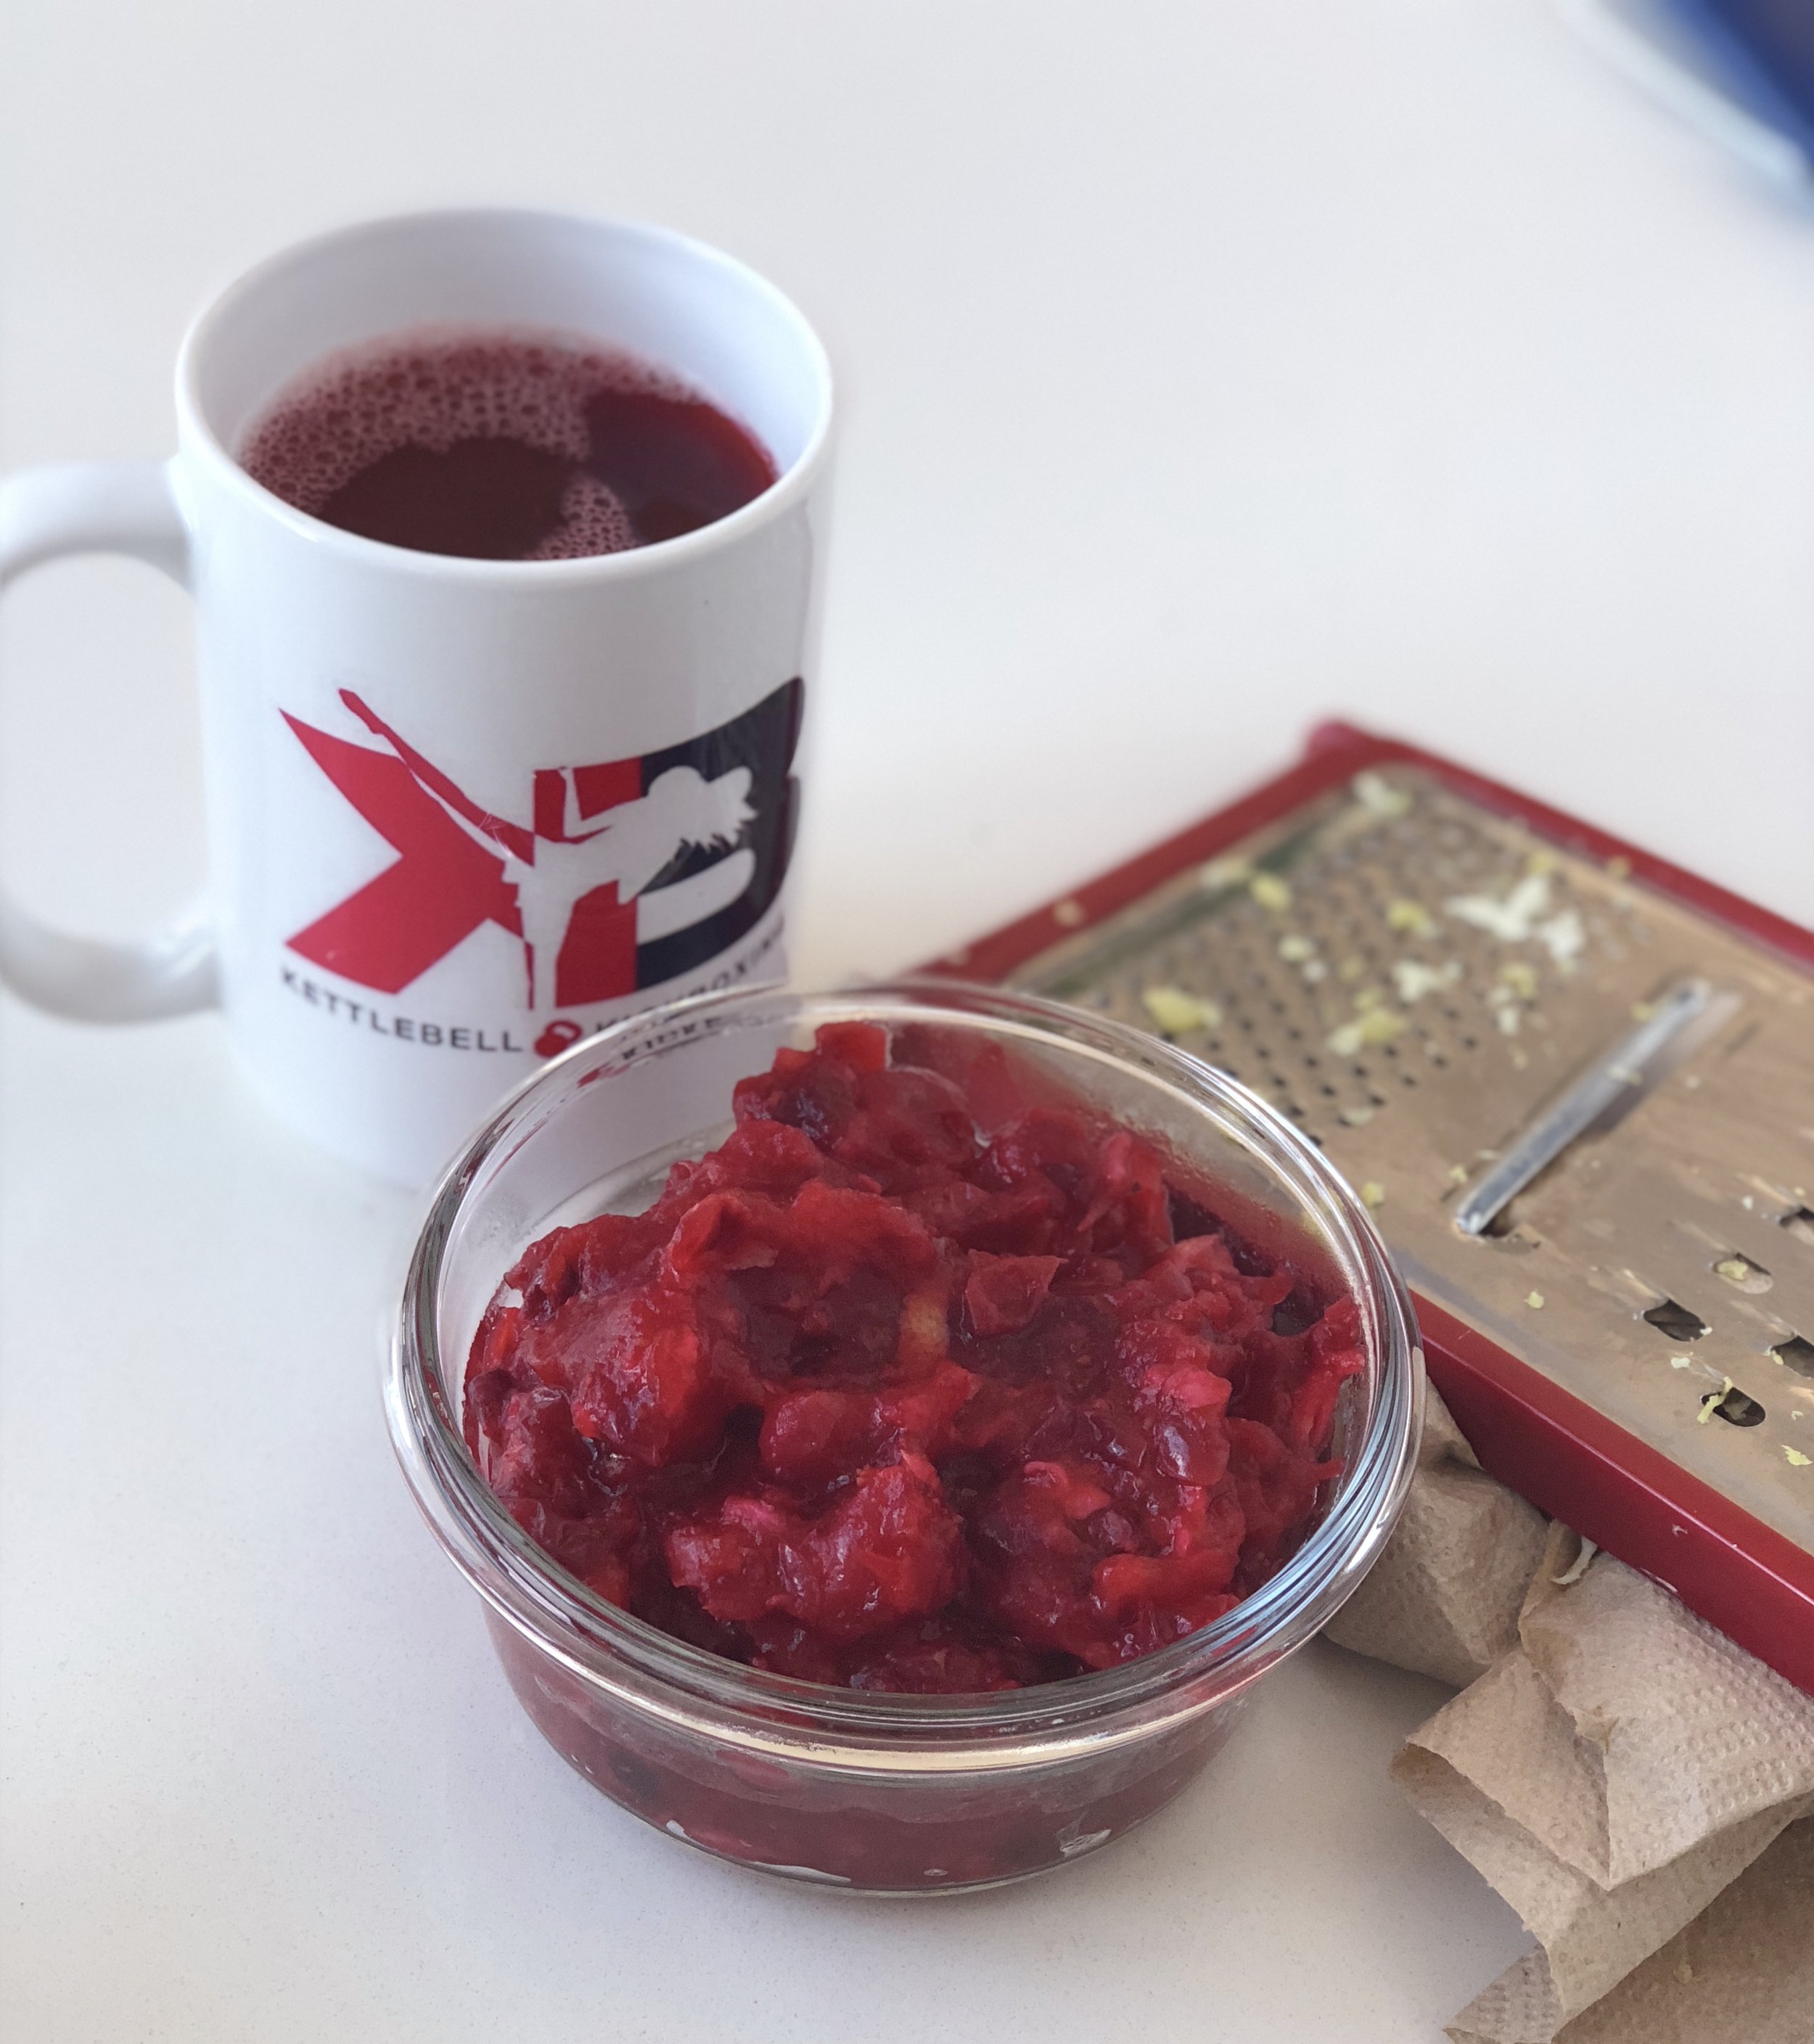 Organic, Authentic, healthy cranberry sauce - Ingredients* 24 oz fresh cranberries ( a bag)* ½ cup no sugar added applesauce* ½ cup water* juice and zest of one orange* 3-4 TBSP honey / agave/ stevia - you decide! or to taste optional